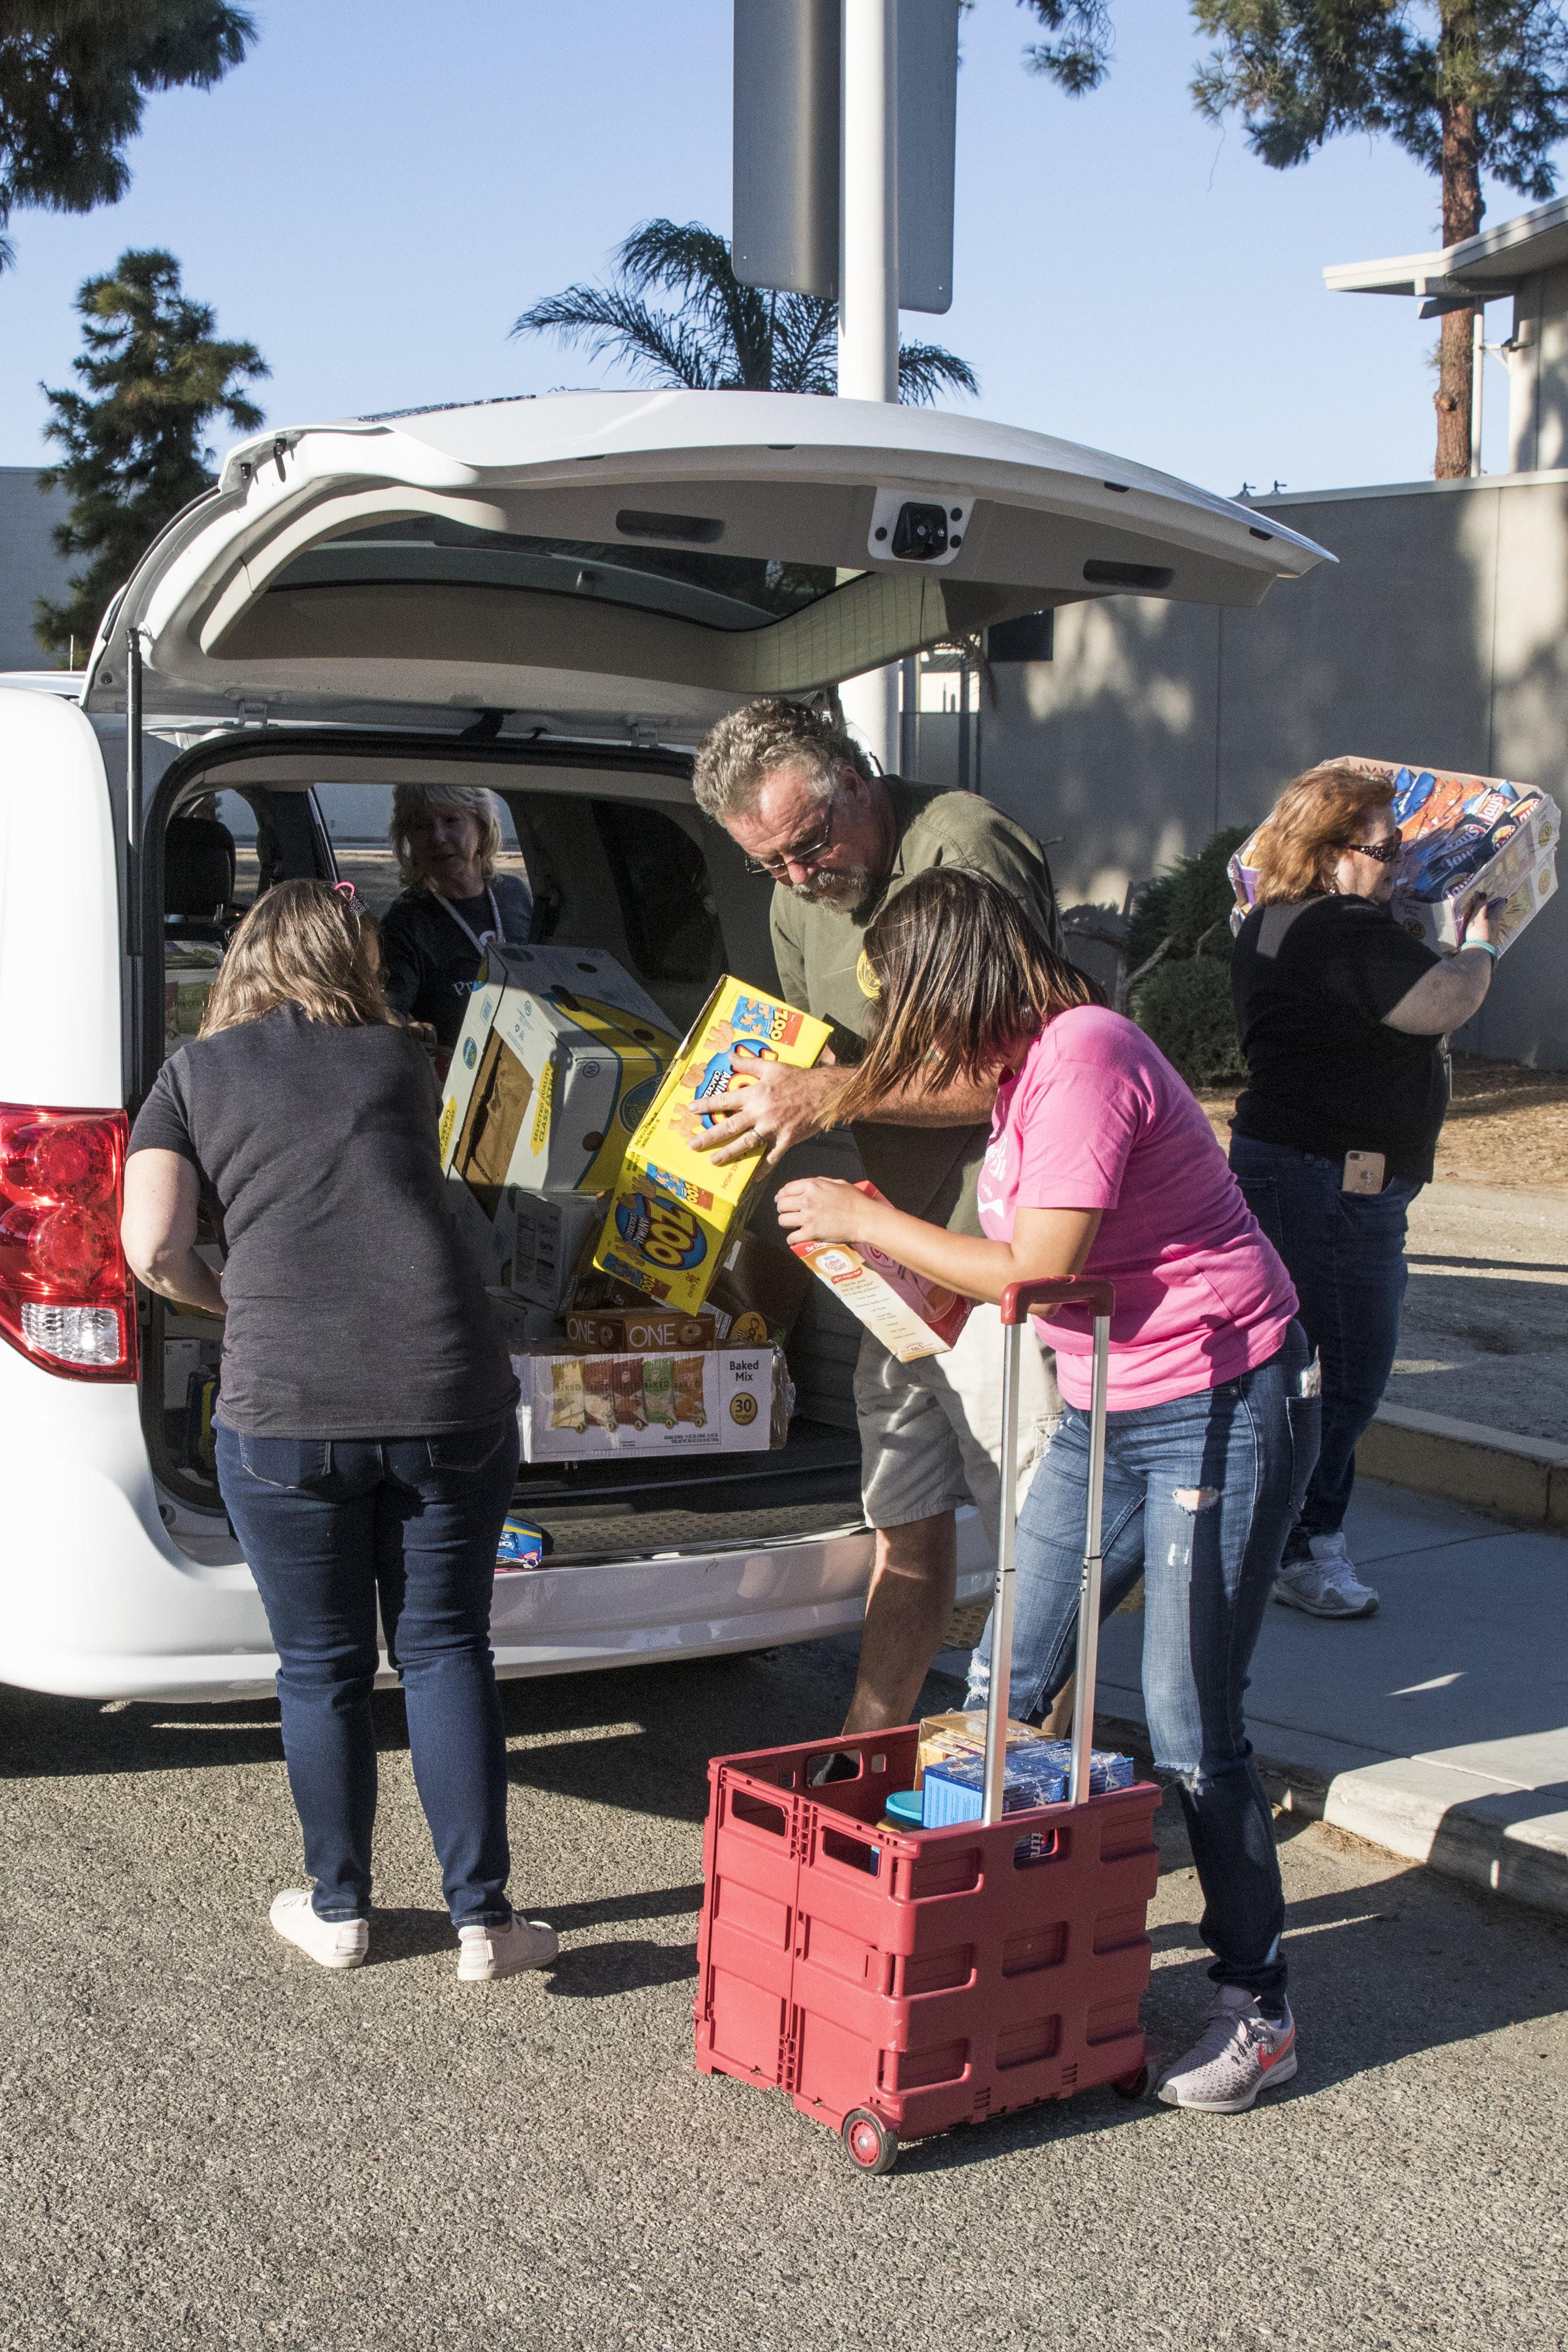  Pierce College employees and volunteers unload a car full of resources for evacuees of the Woolsey Fire who have taken refuge at Pierce College in Woodland HIlls, California on November 9, 2018. (Zane Meyer-Thornton/Corsair Photo) 